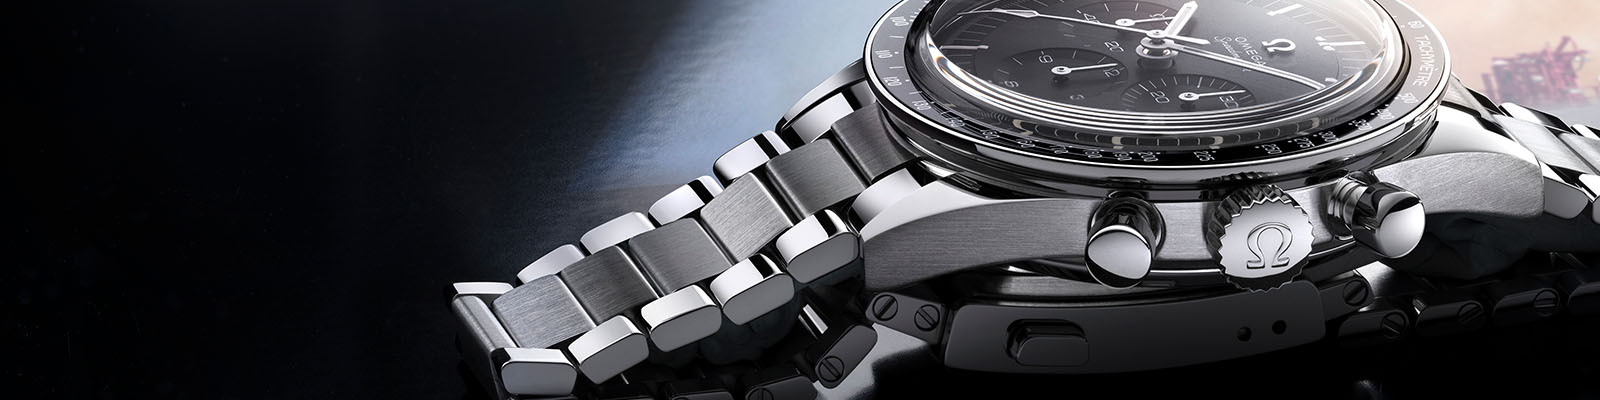 omega hand winding watches